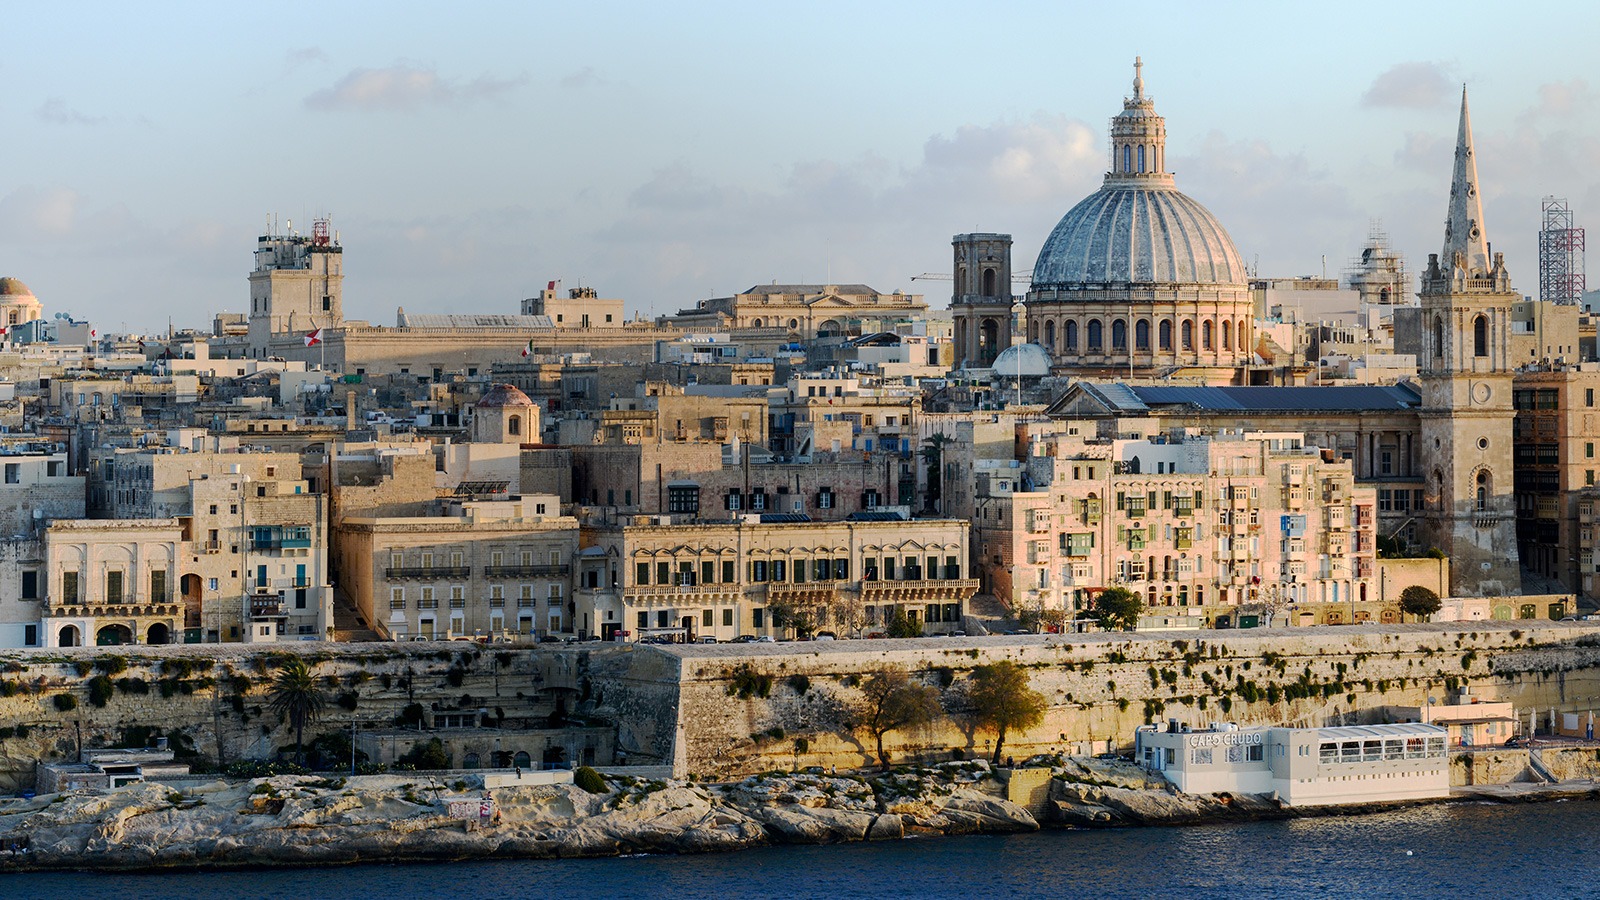 Malta's strengths, and what to watch out for